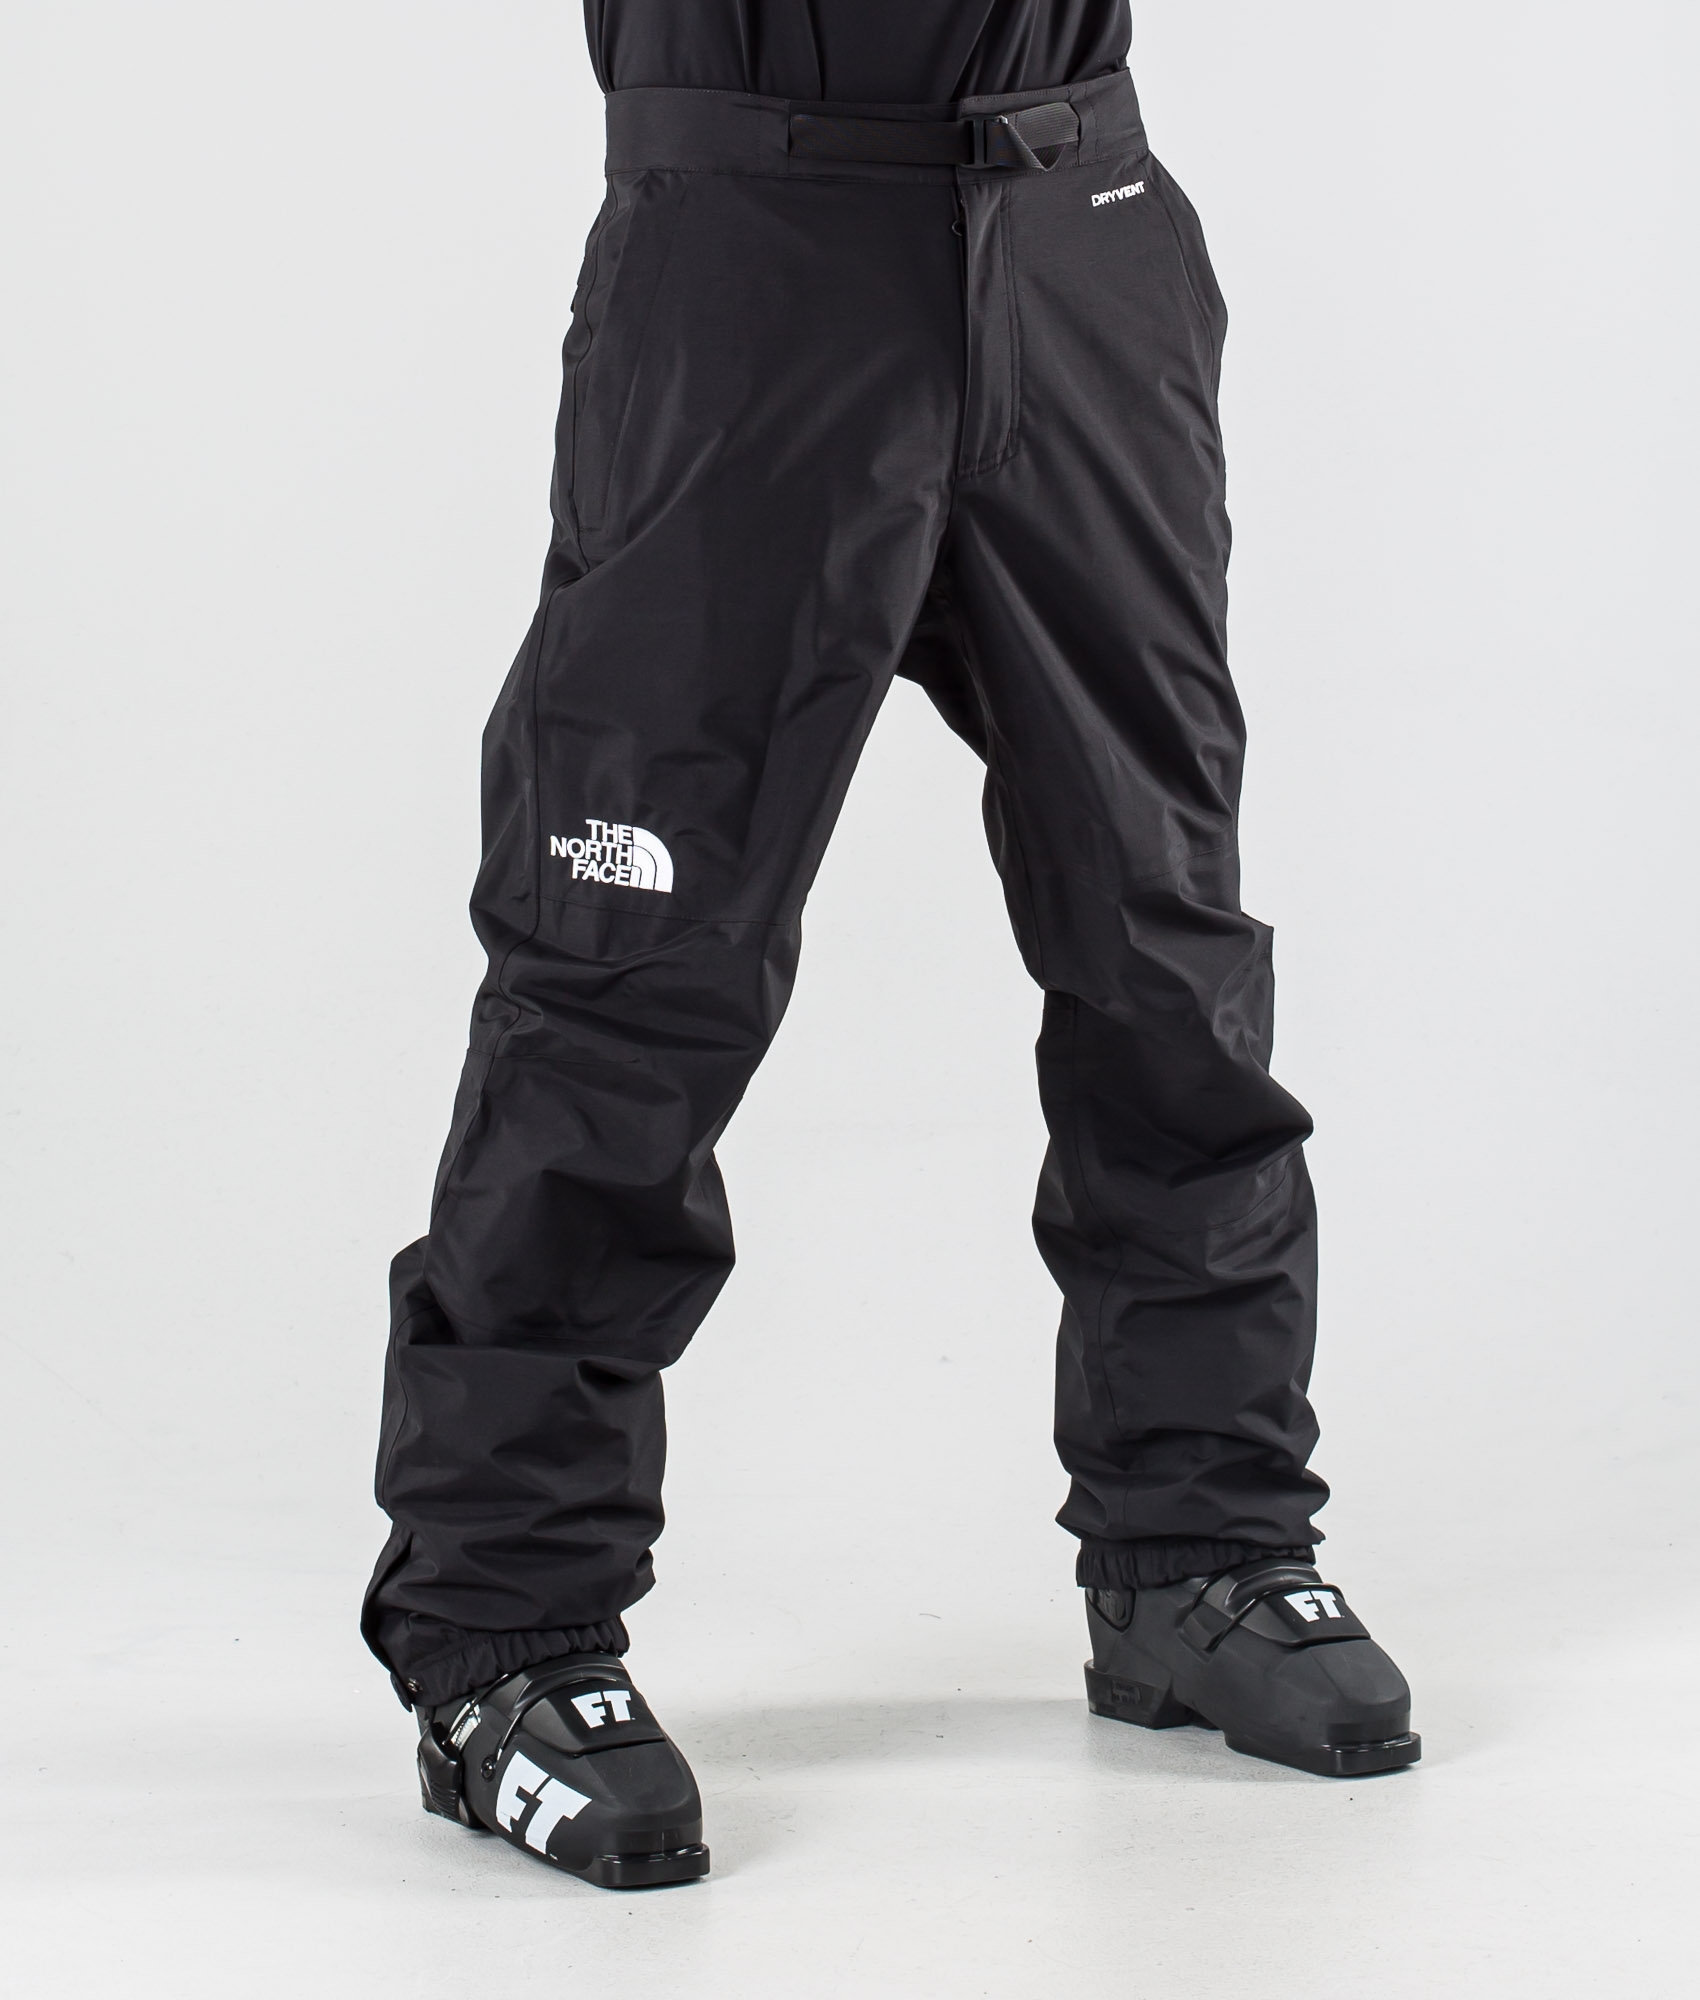 north face ski outfits